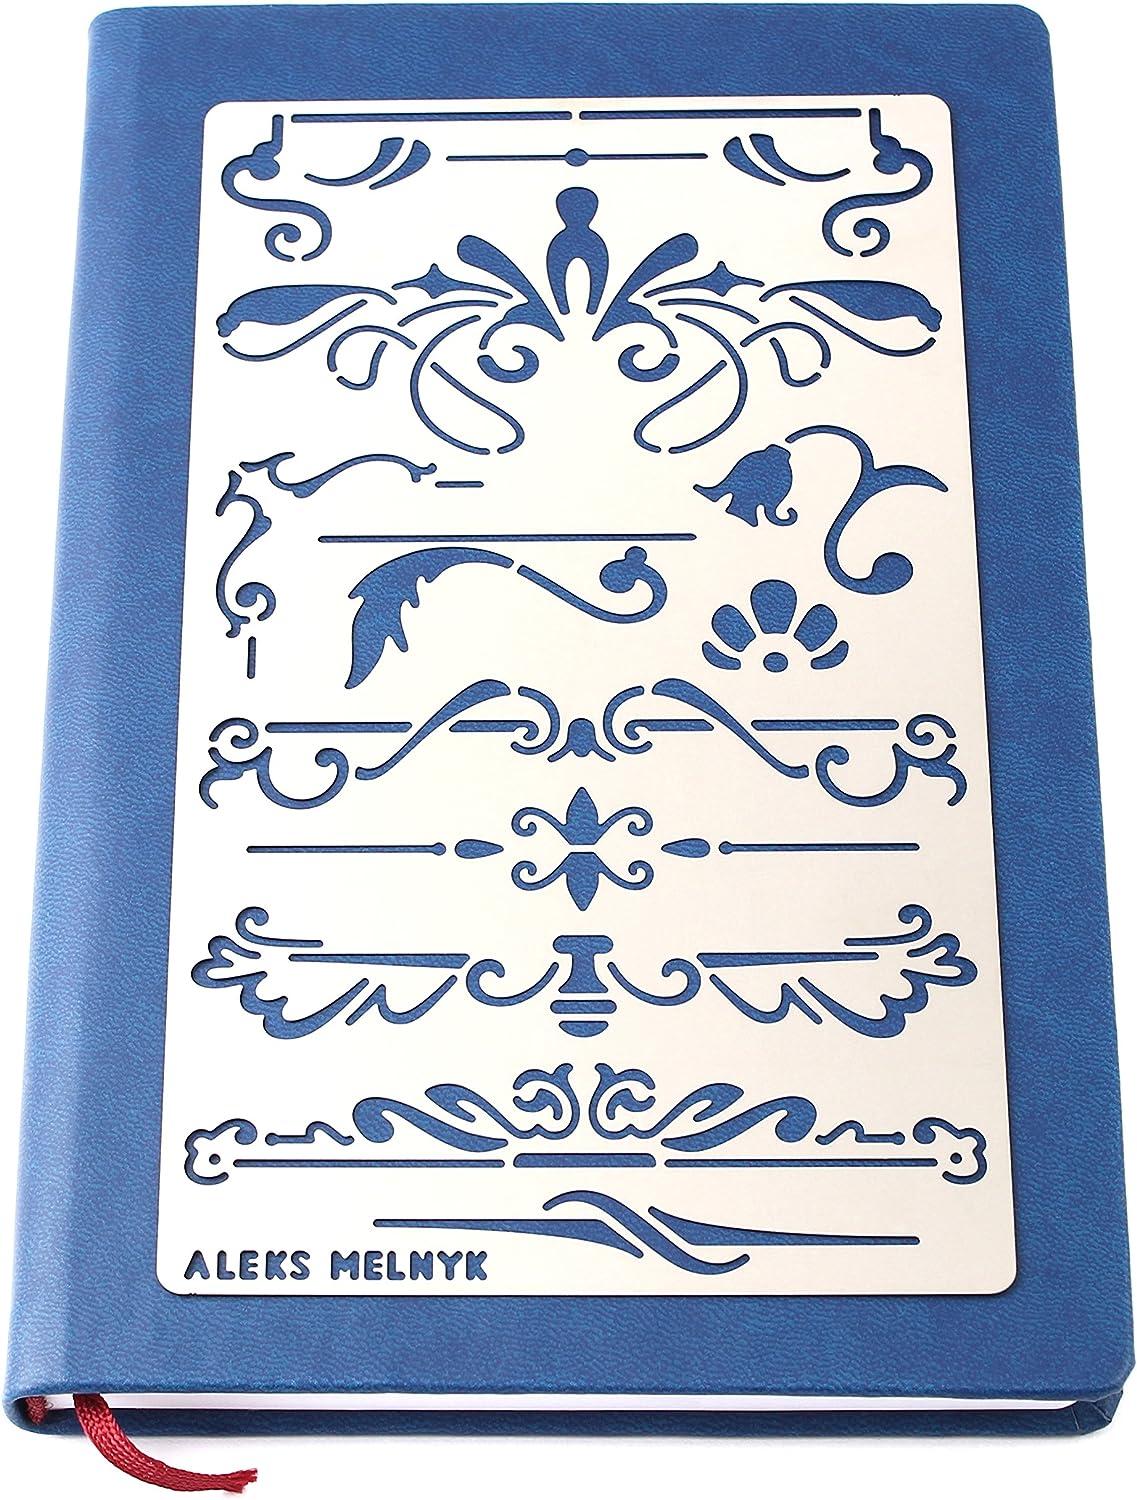 Aleks Melnyk #42 Metal Journal Stencils, Flowers and Vines, Ornament, Vintage, Finds Small Stencils Patterns, Templates for Painting on Wood, on